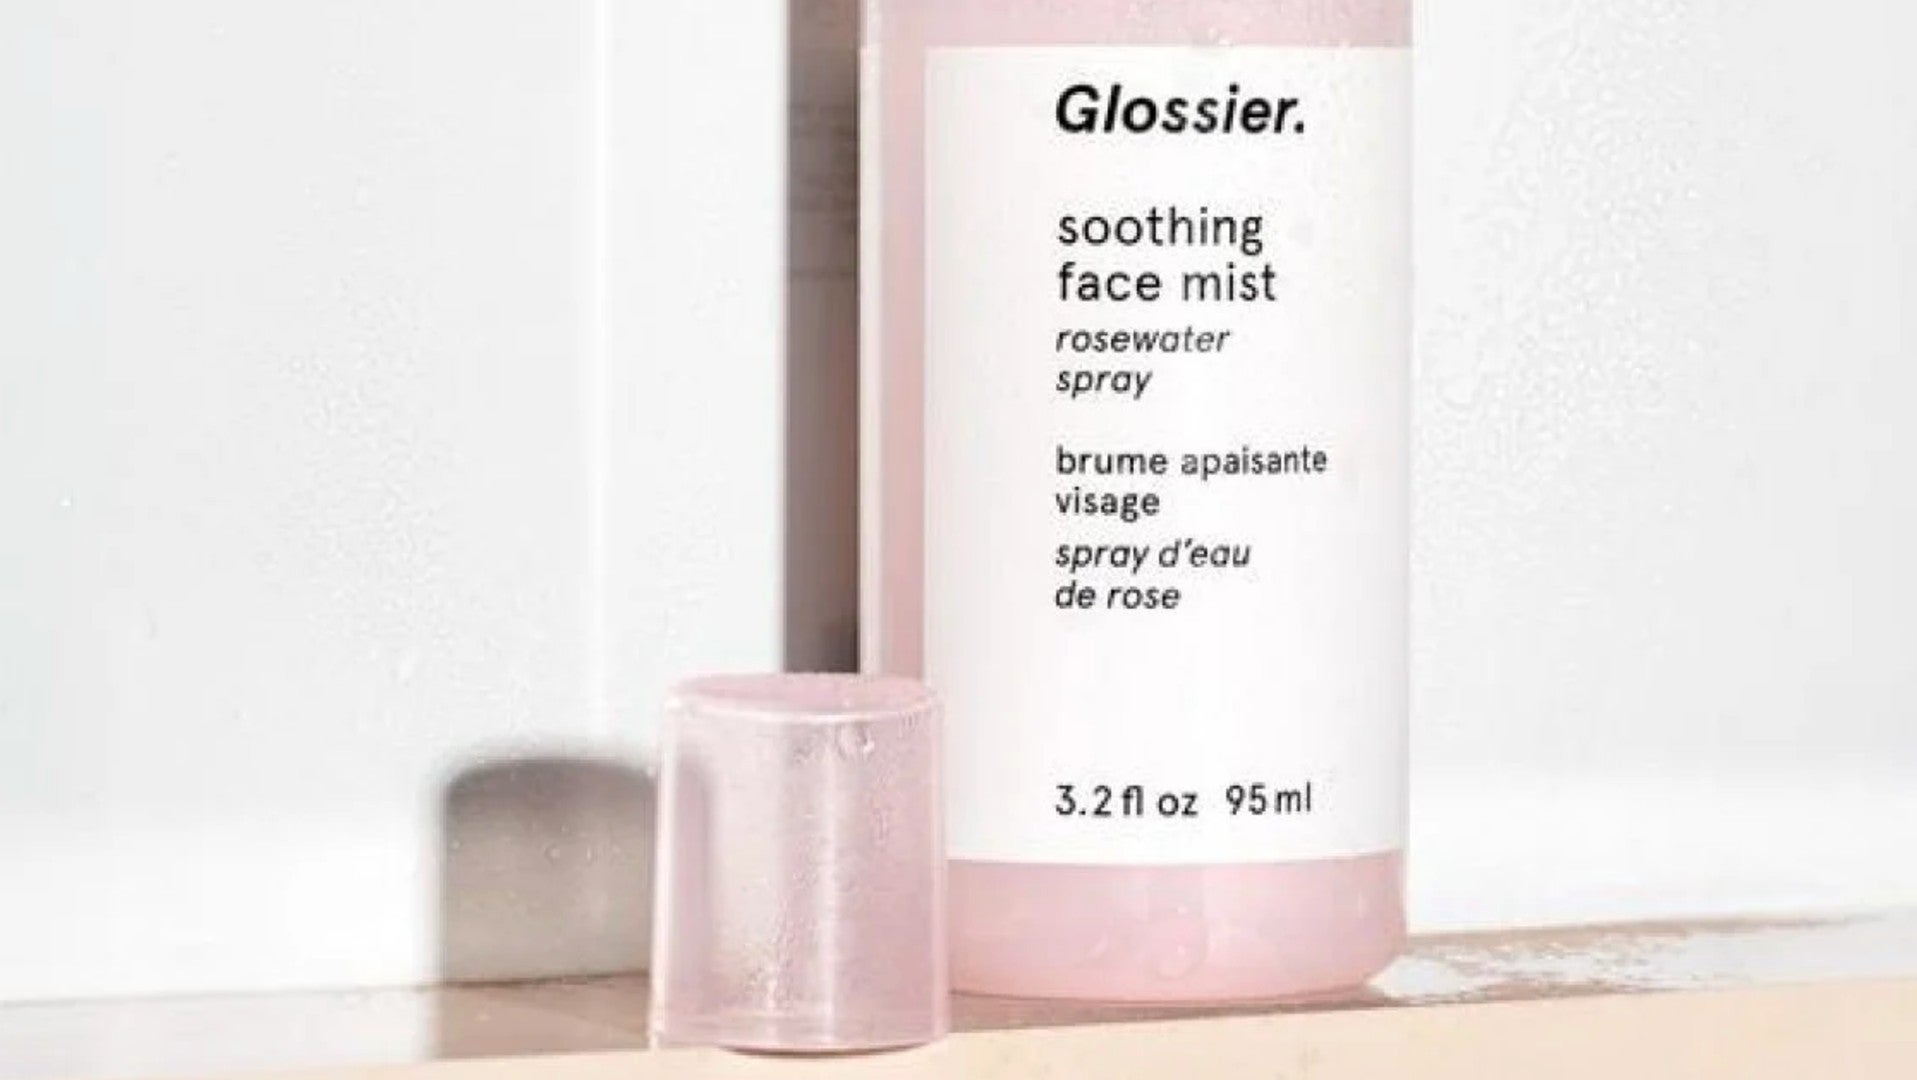 How To Apply For Glossier's Grant For Black-Owned Beauty Businesses